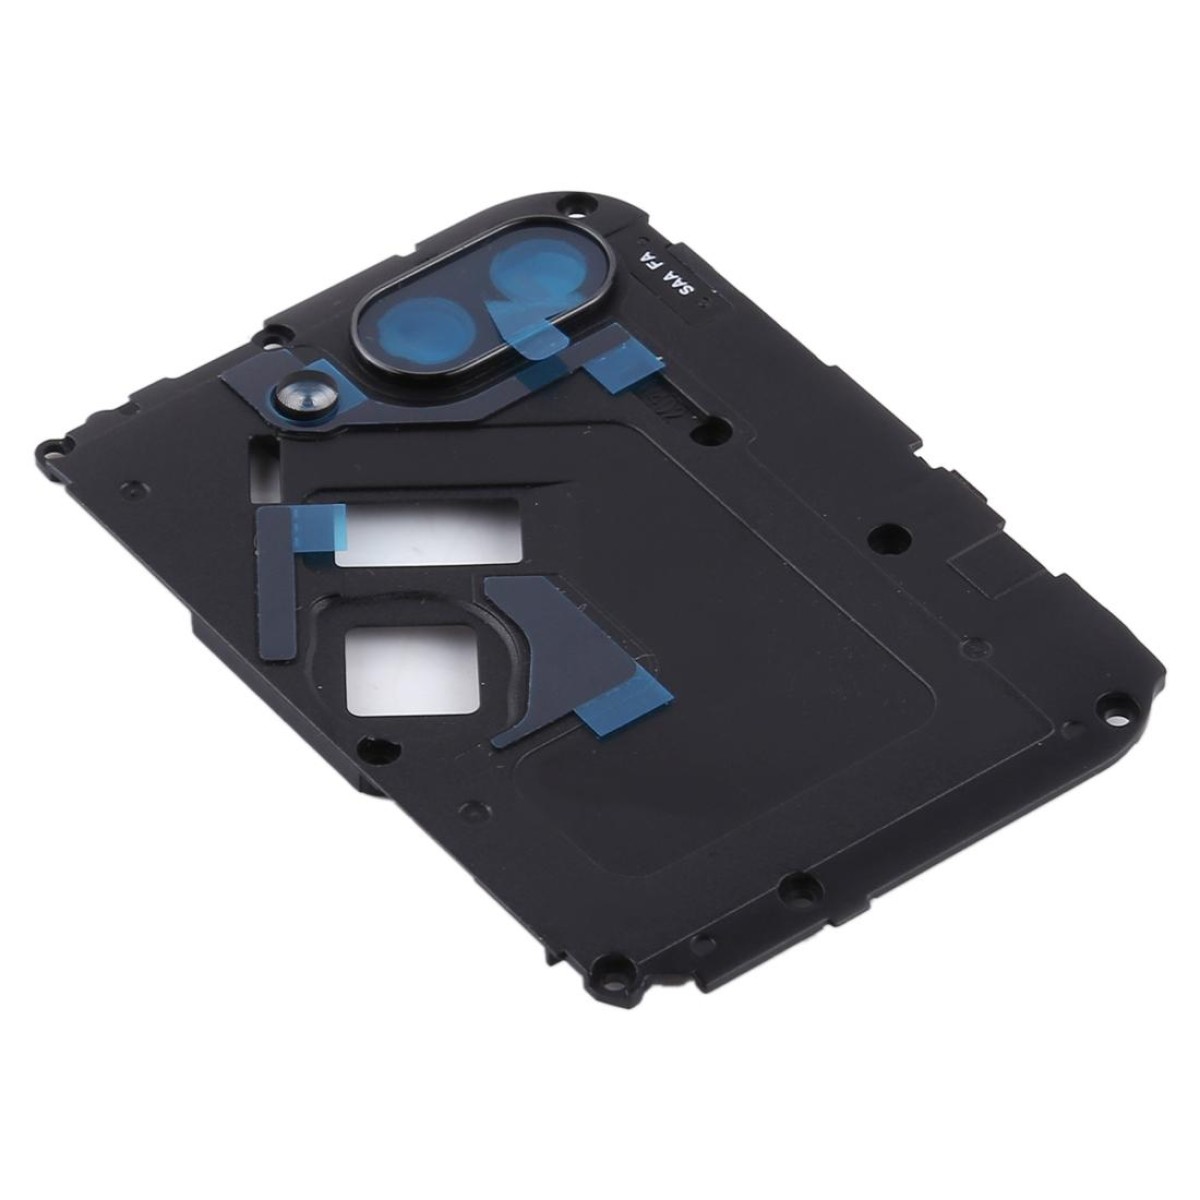 Motherboard Protective Cover for Xiaomi Redmi 7